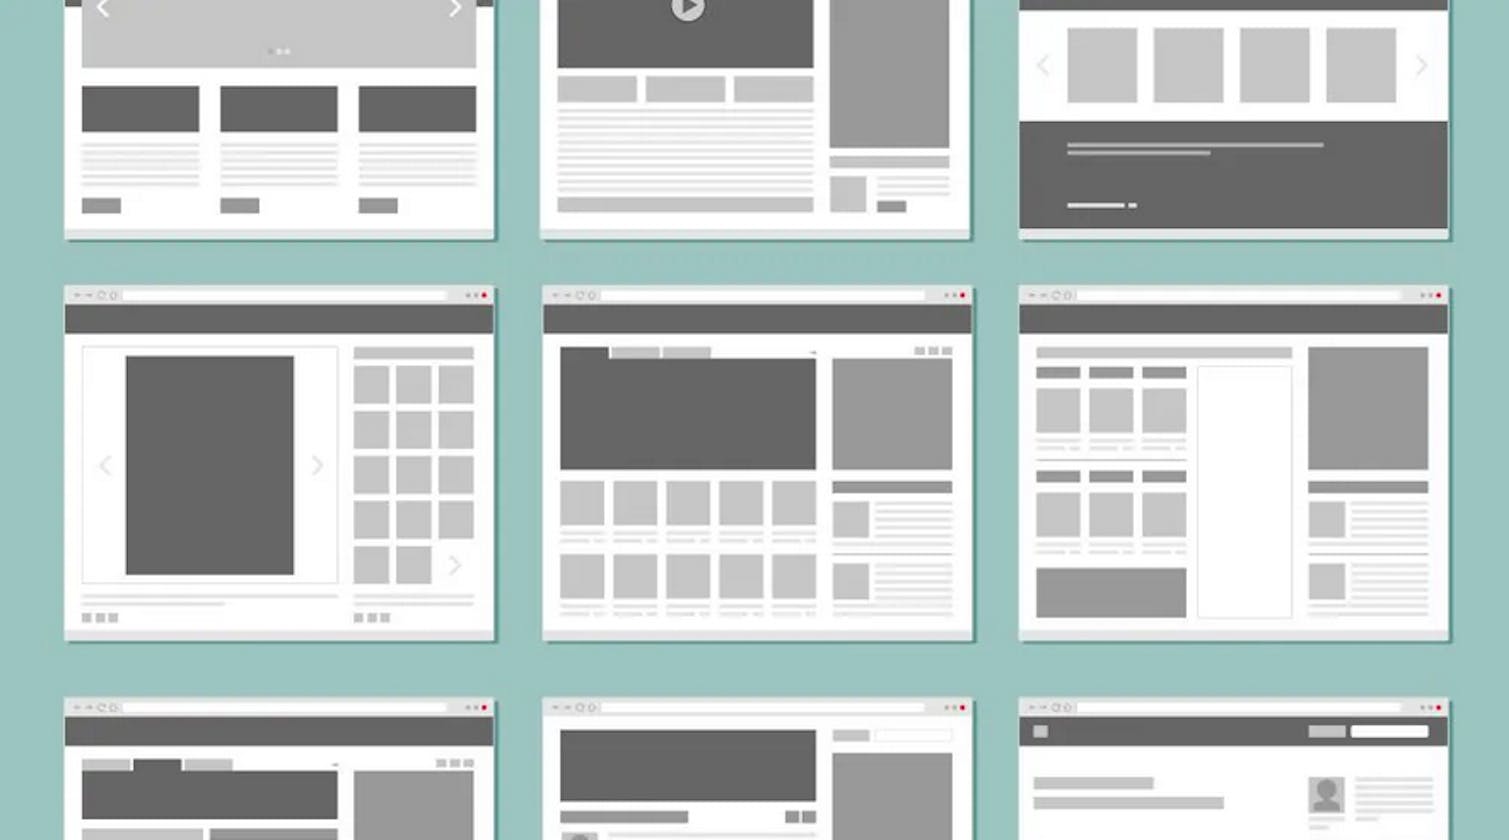 Web design templates for your website